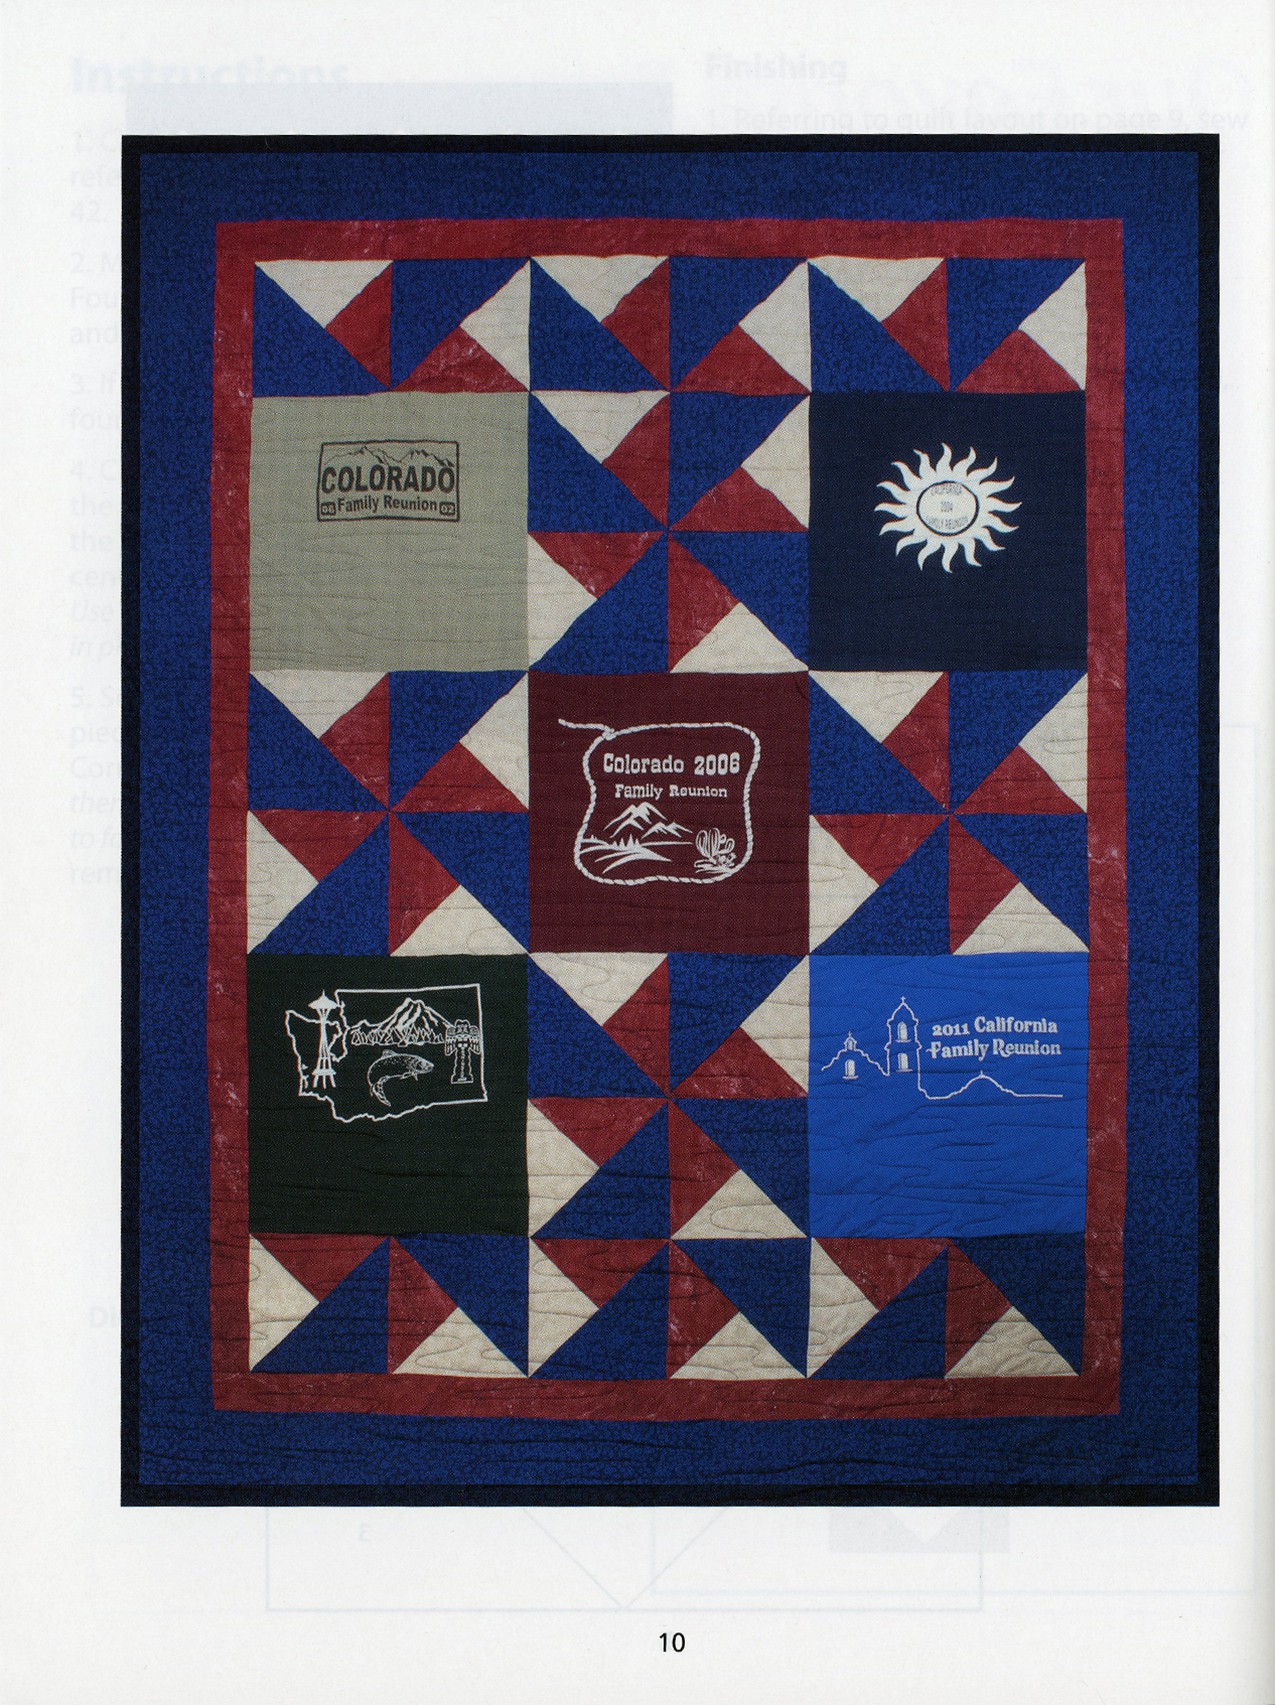 T-Shirt Quilts By Causee, Linda